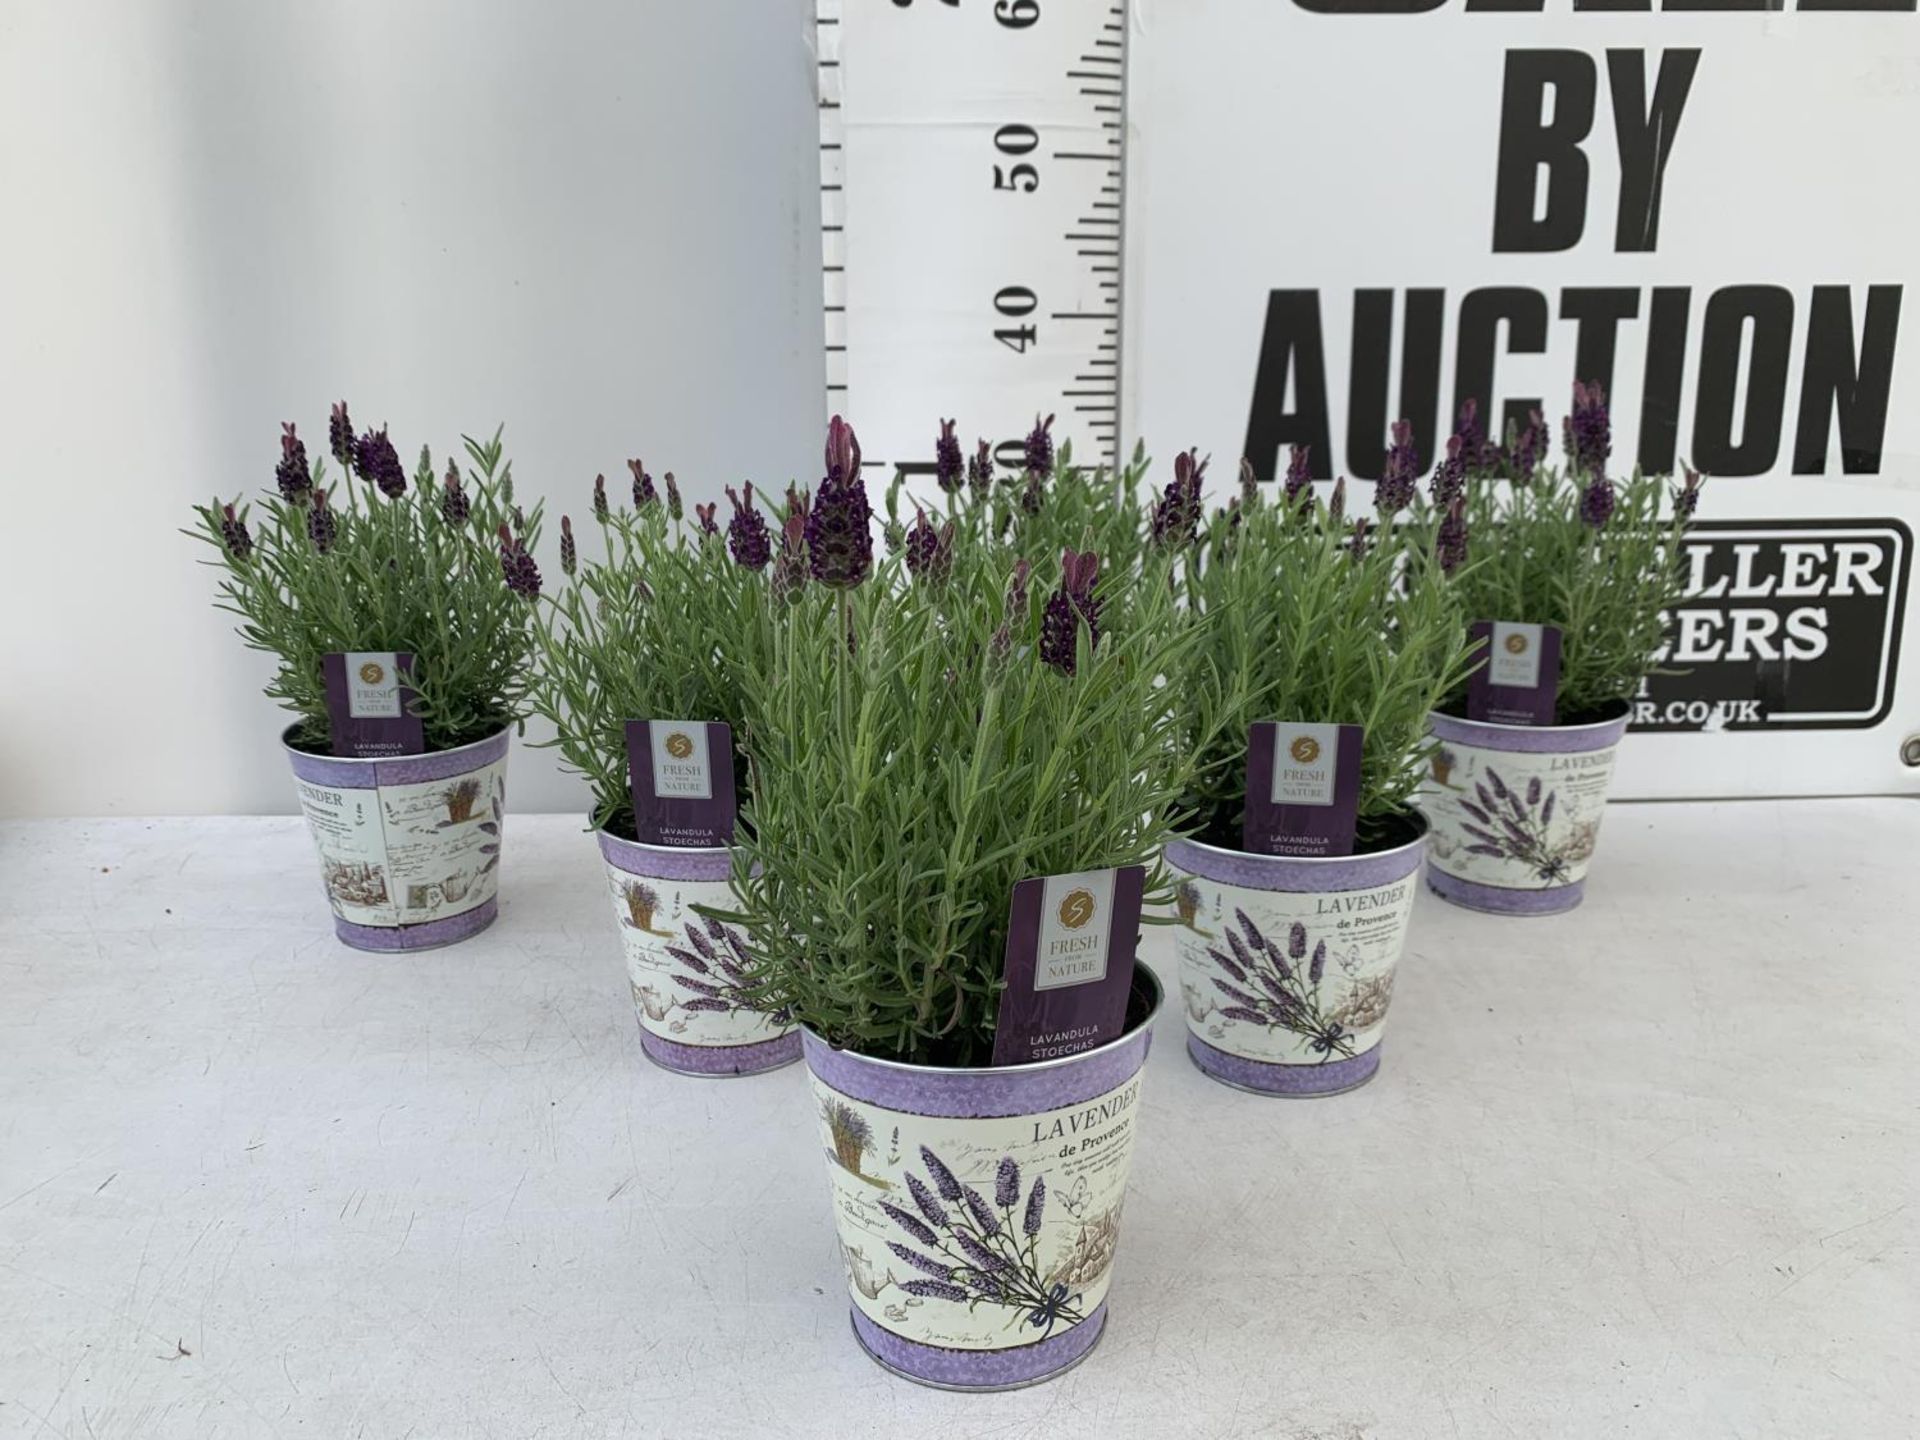 SIX LAVENDULA LAVENDER ST ANOUK COLLECTION IN DECORATIVE METAL POTS TO BE SOLD FOR THE SIX NO VAT - Image 2 of 8